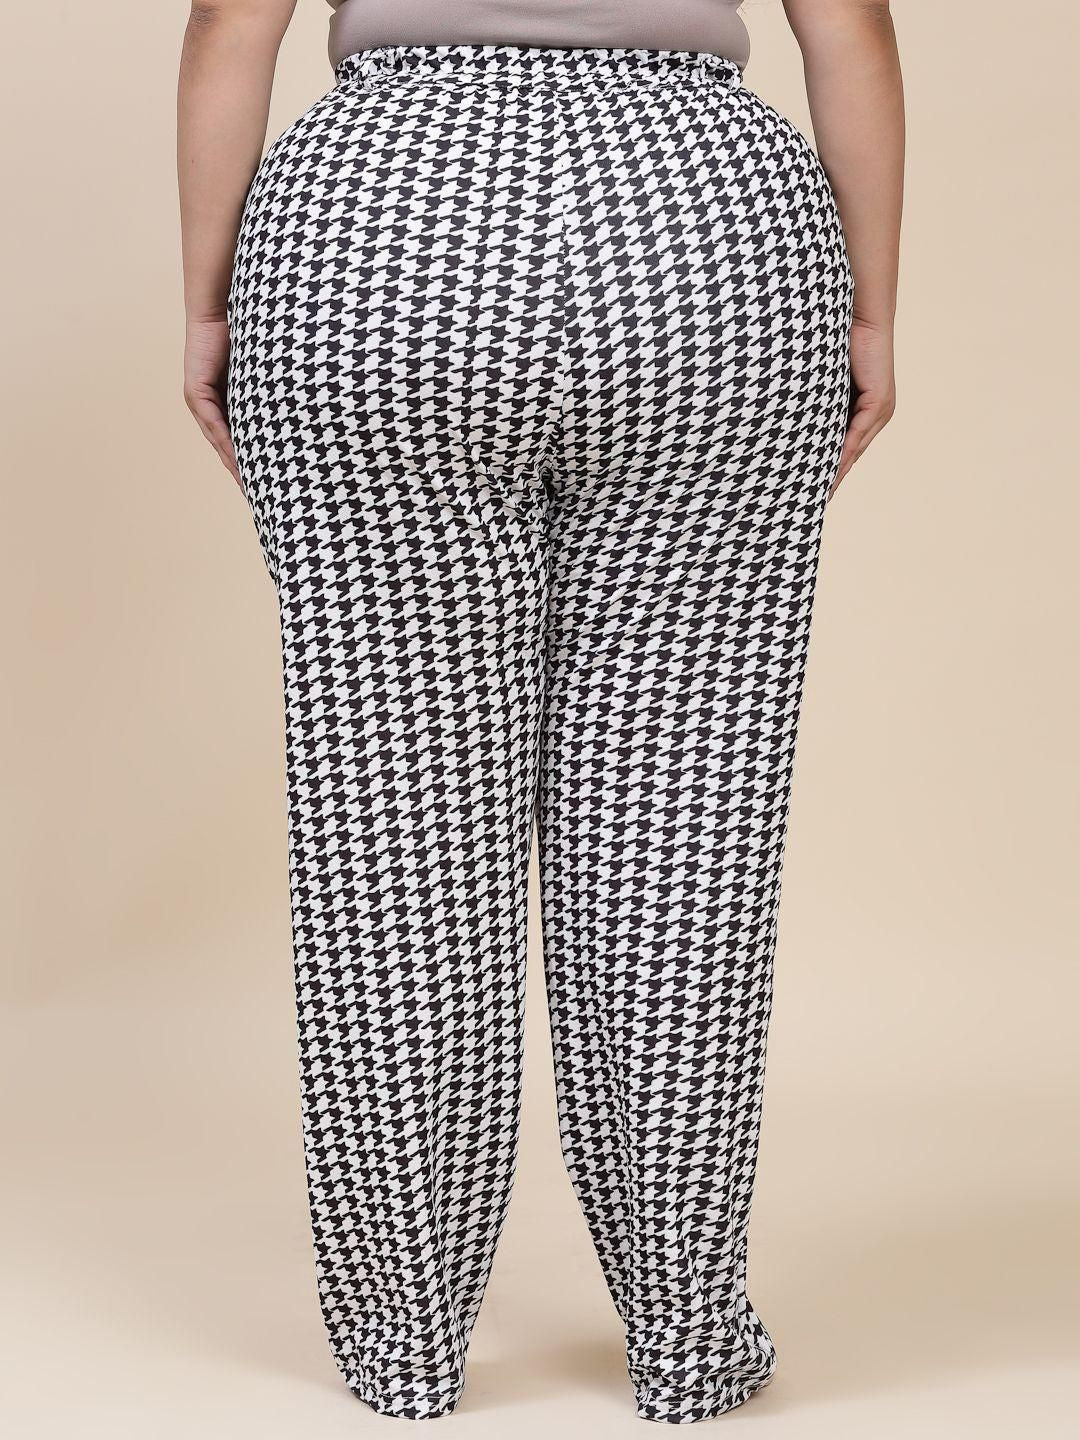 Flambeur Women's Plus Size Casual Printed Trouser